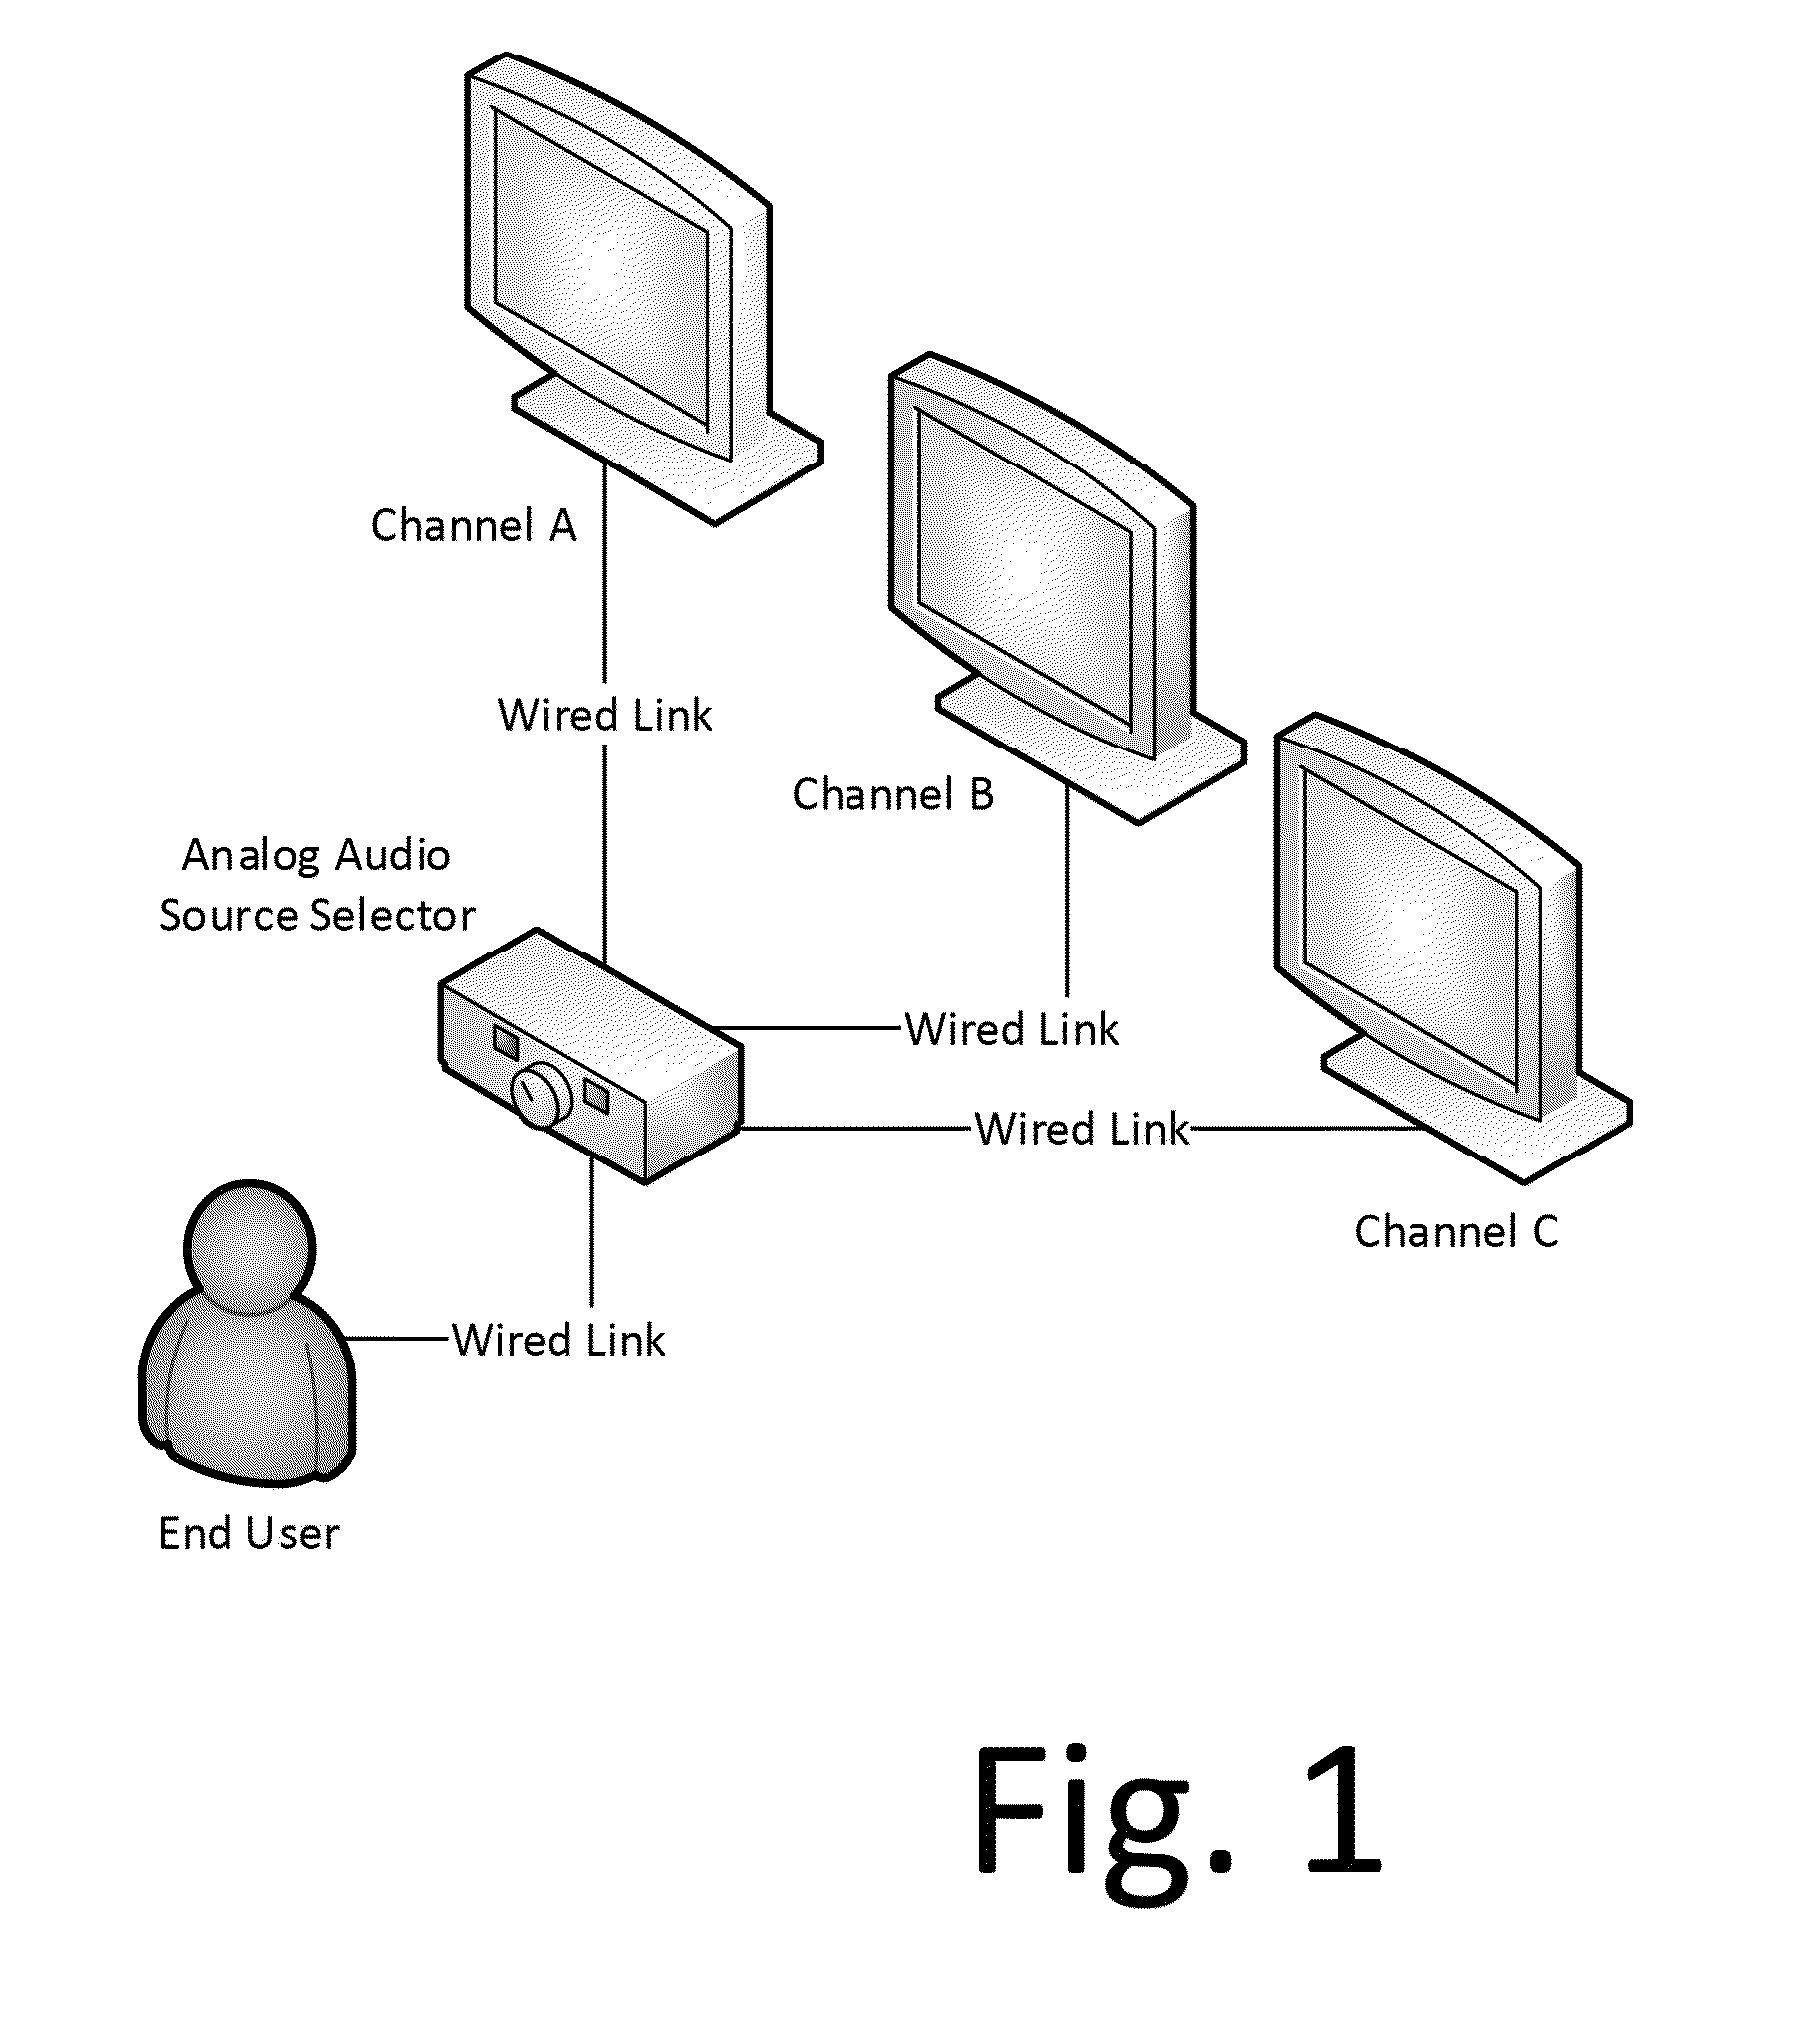 Synchronous audio distribution to portable computing devices